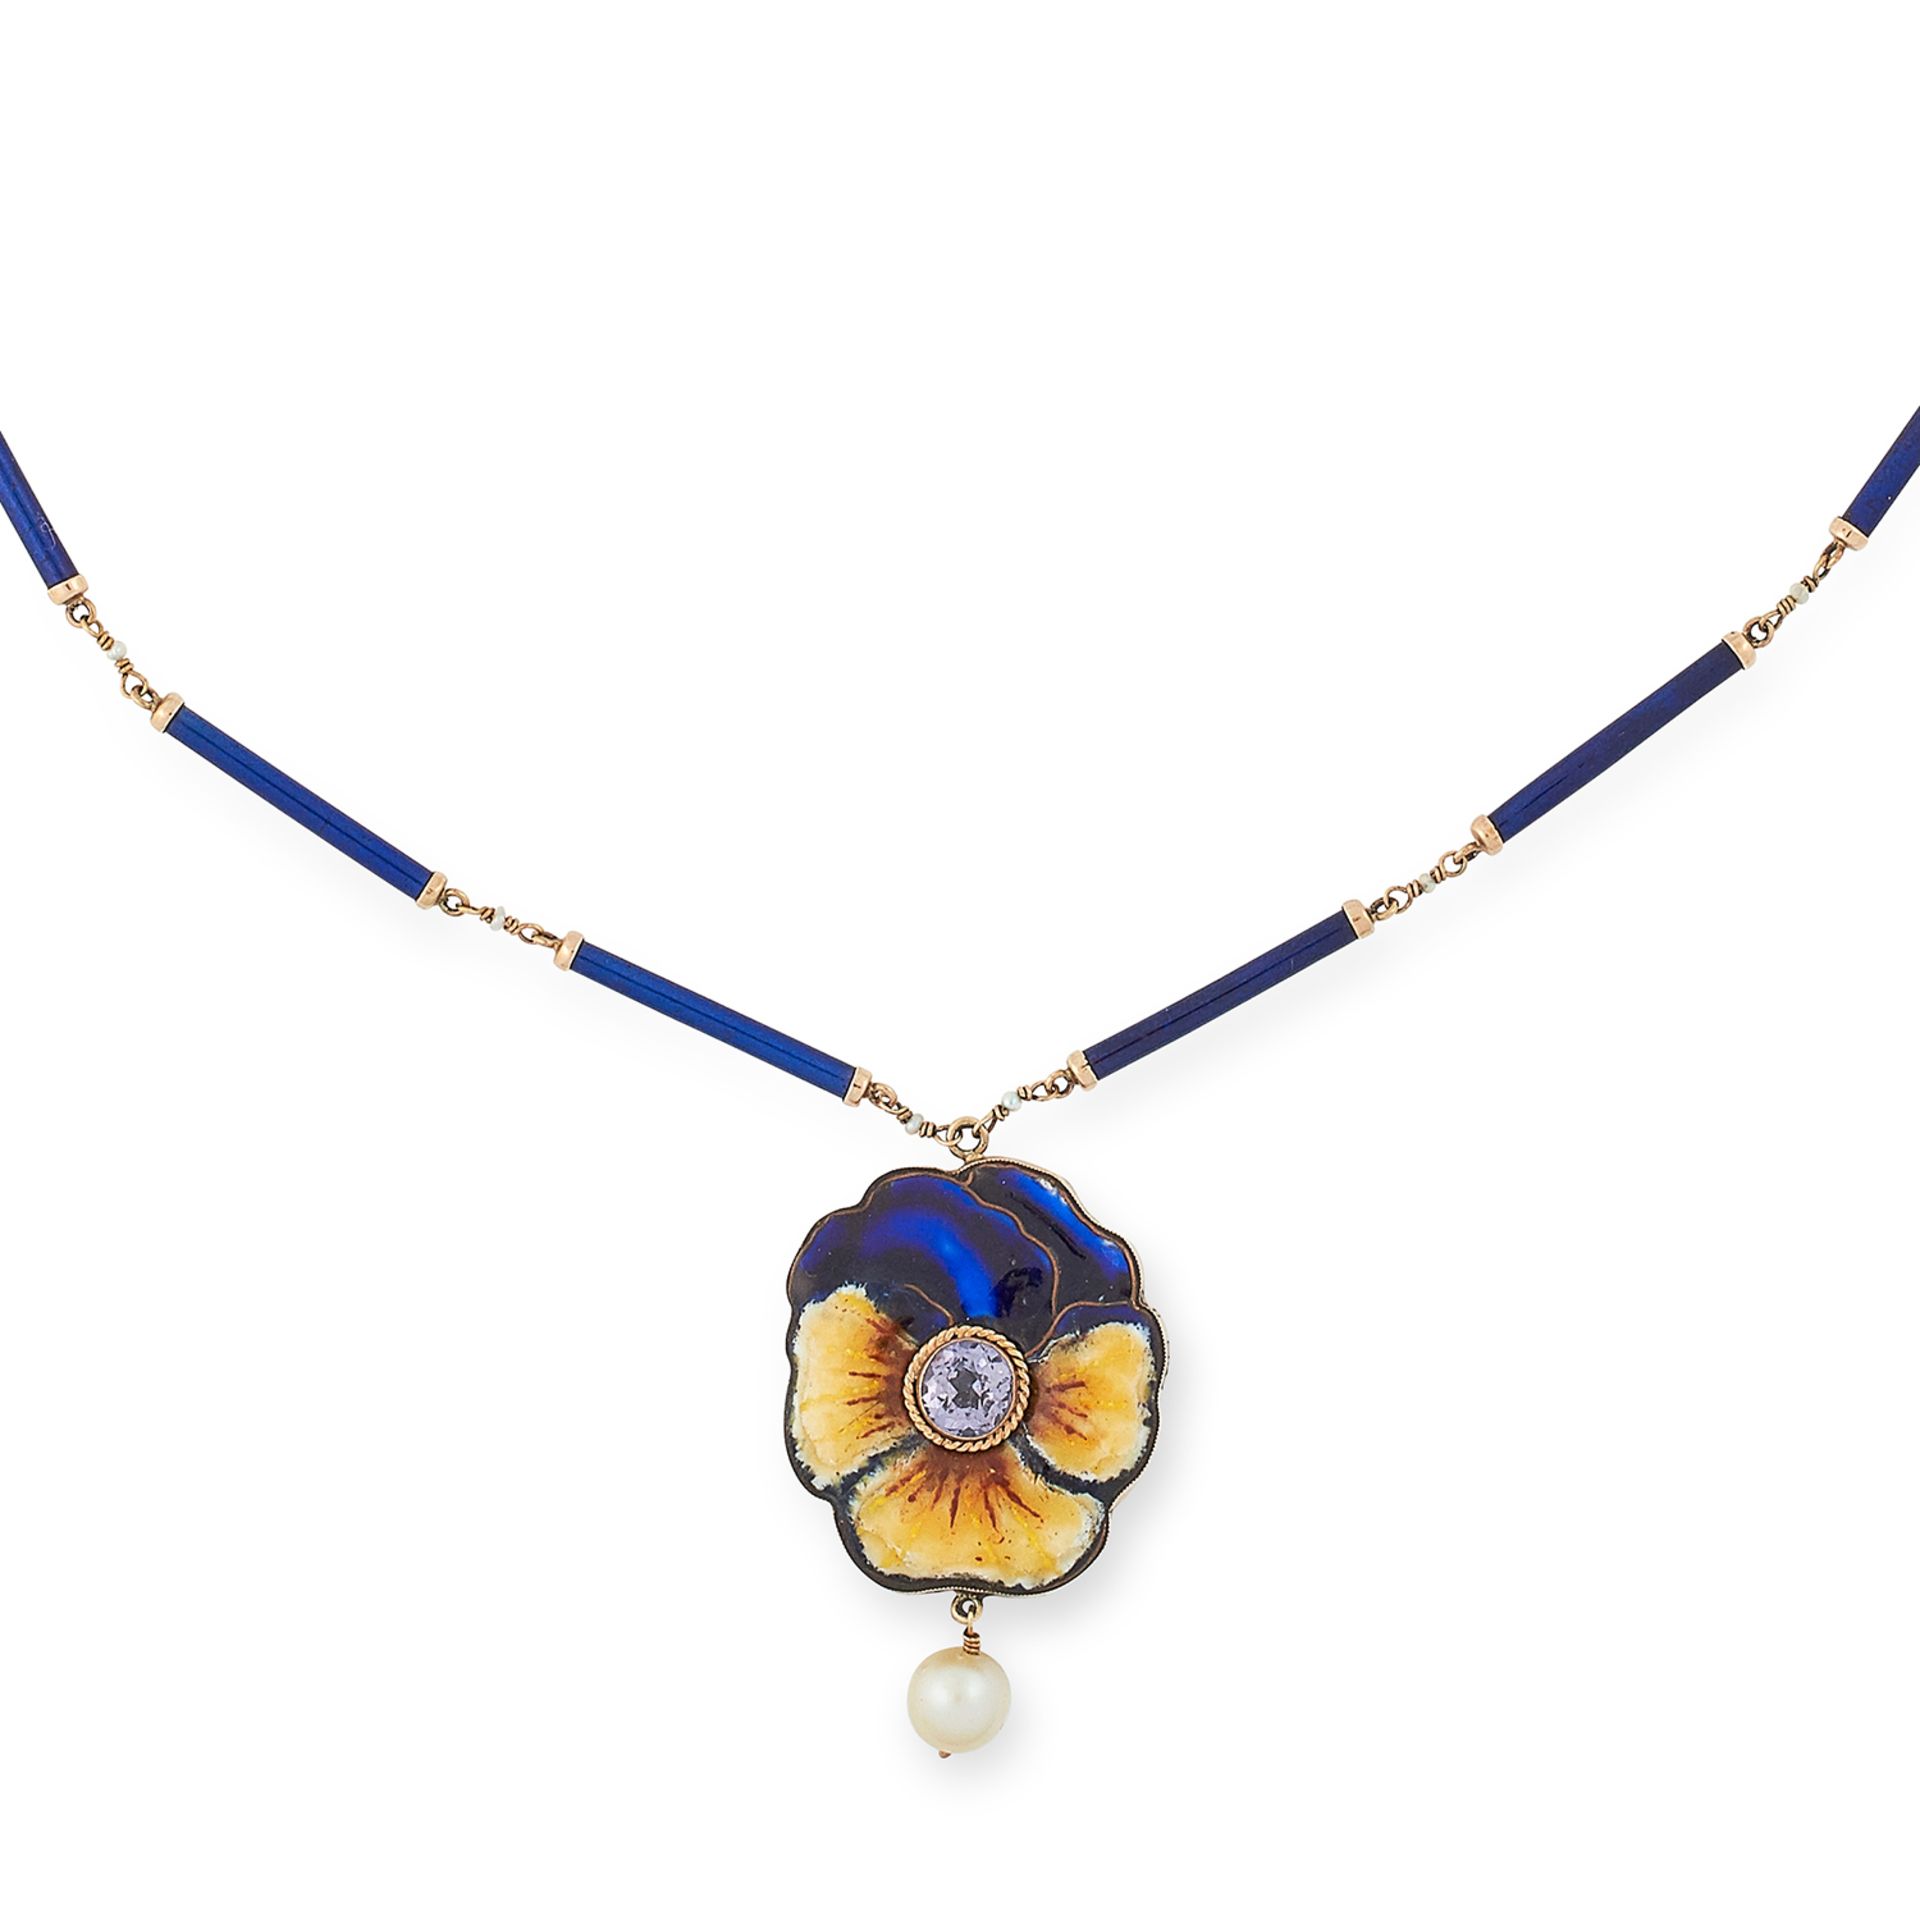 ANTIQUE ENAMELLED PANSY NECKLACE set with a purple faceted stone and a pearl, 43.5cm, 11g. - Bild 2 aus 2